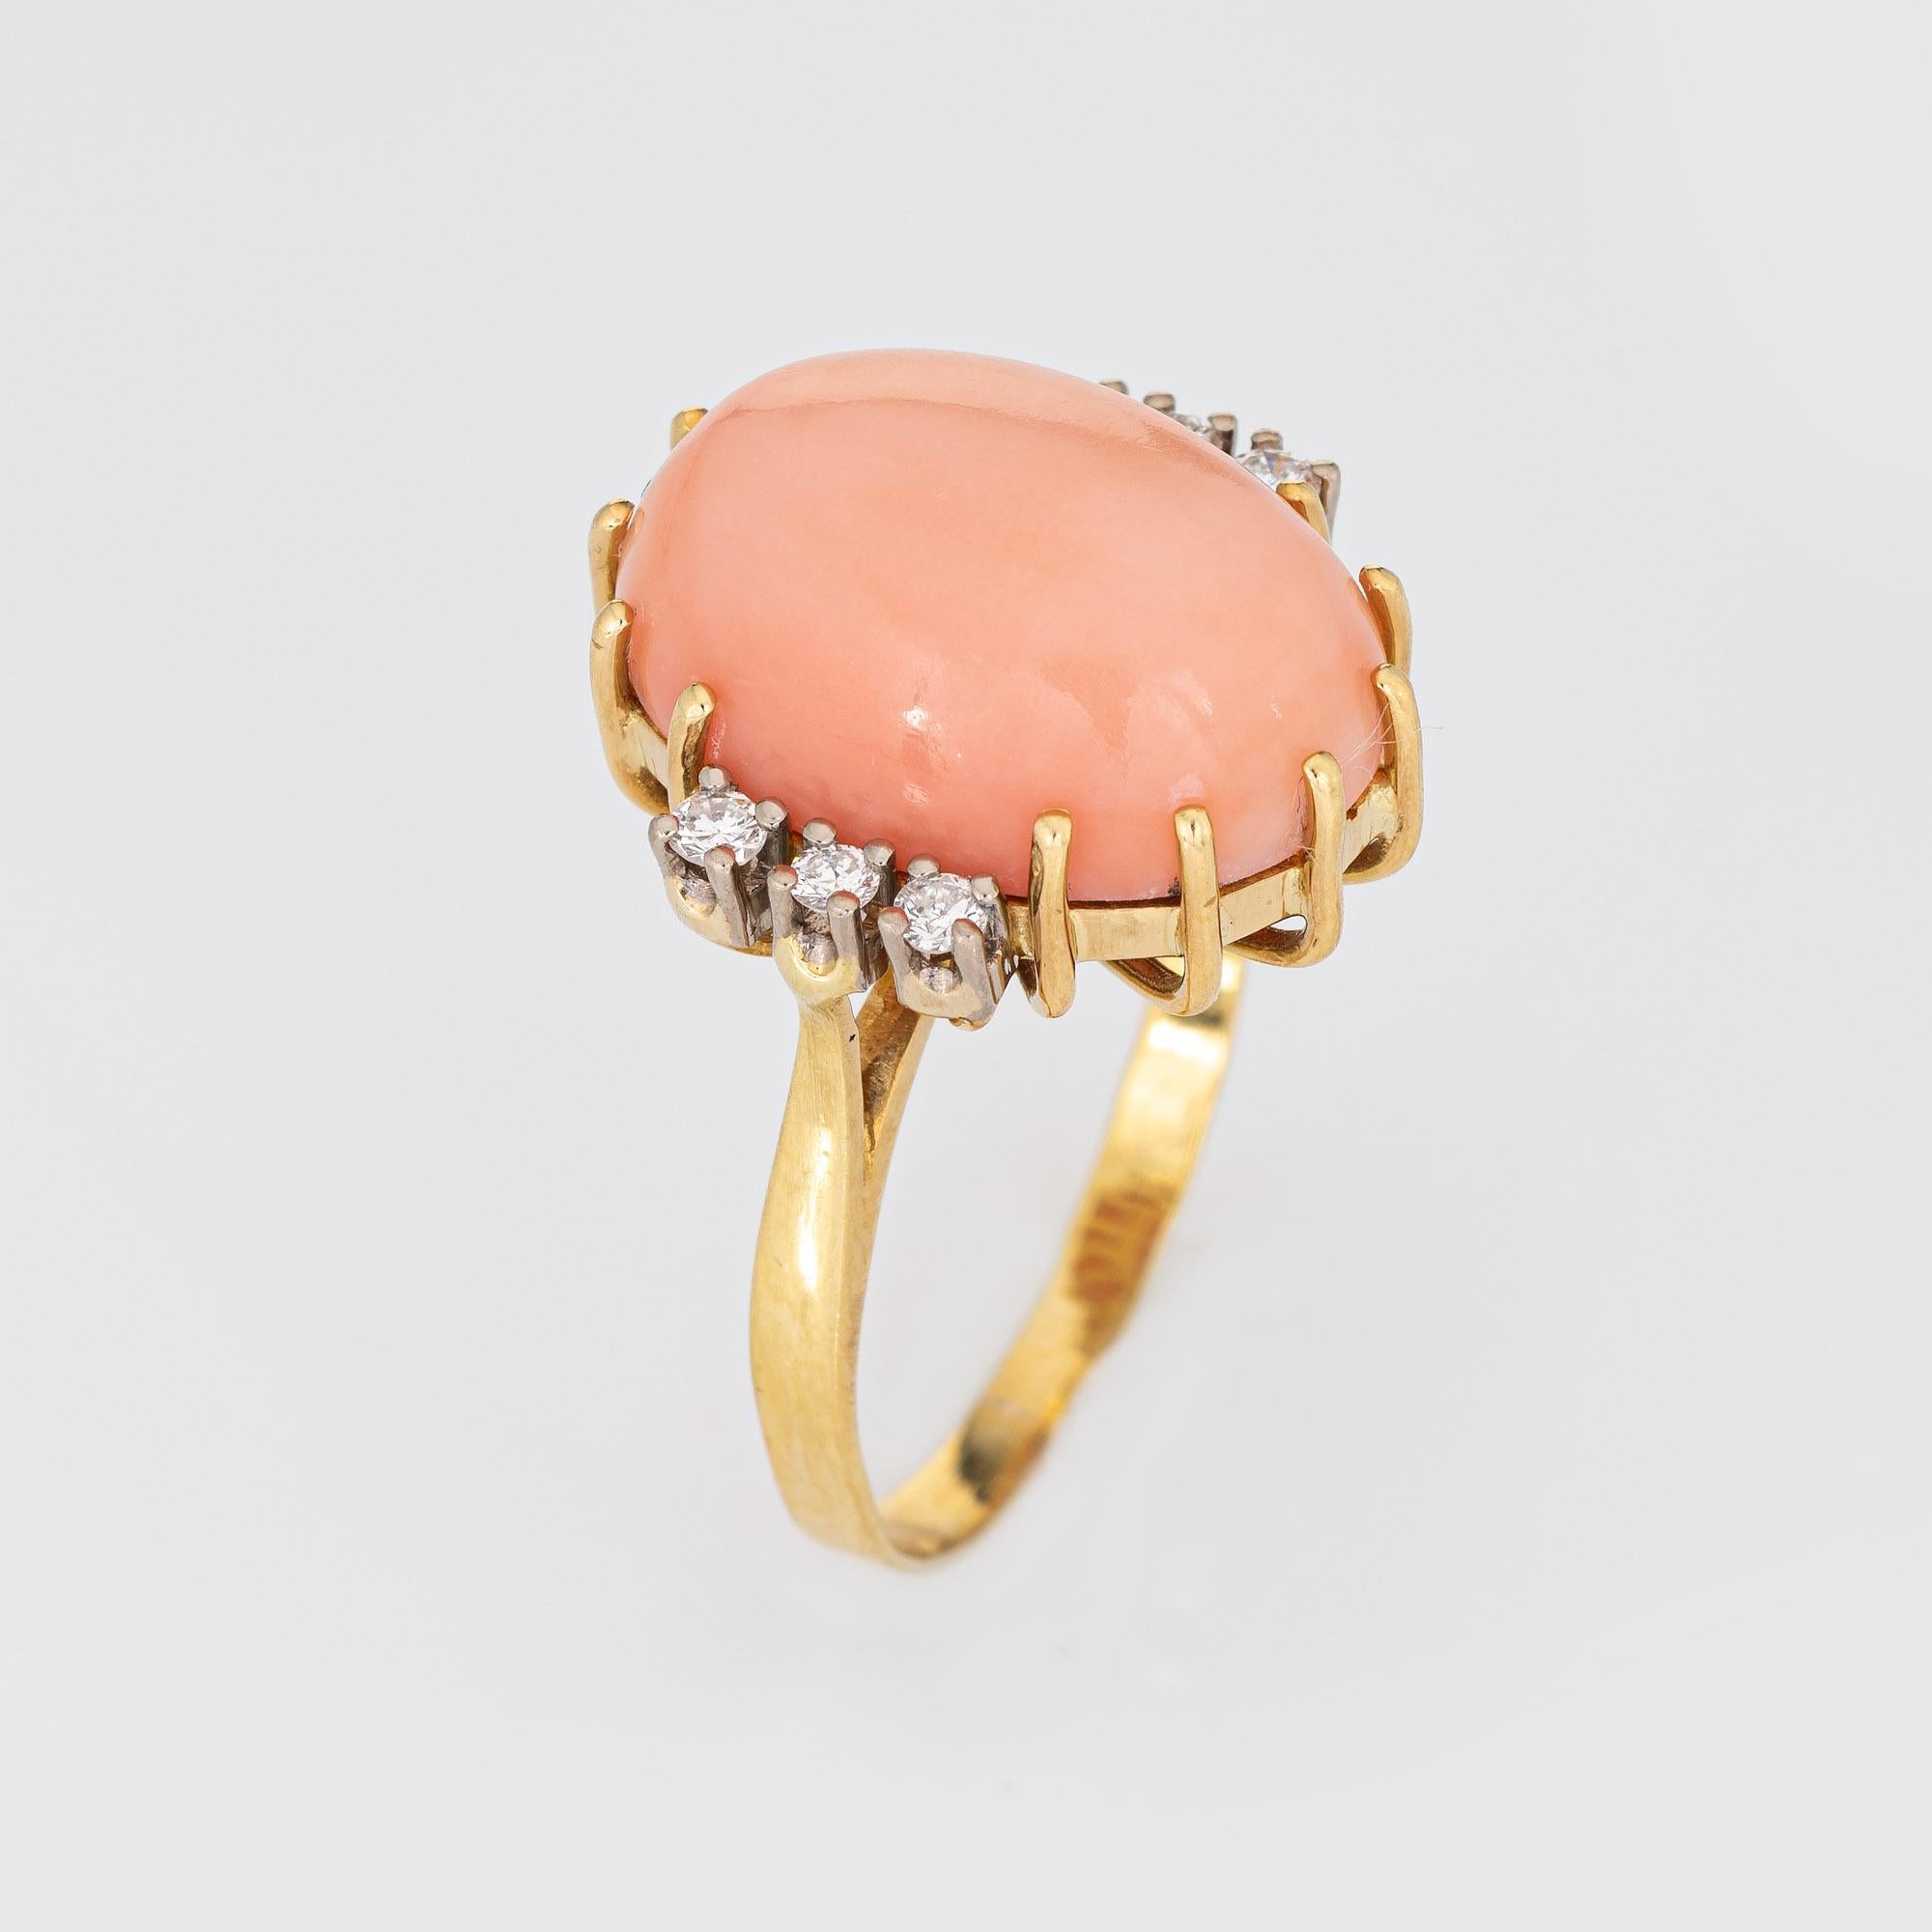 Stylish vintage coral & diamond cocktail ring (circa 1970s) crafted in 18 karat yellow gold. 

Coral cabochon measures 10mm x 7mm (estimated at 7 carats). Six diamonds total an estimated 0.18 carats (estimated at H-I color and VS1-2 clarity). The